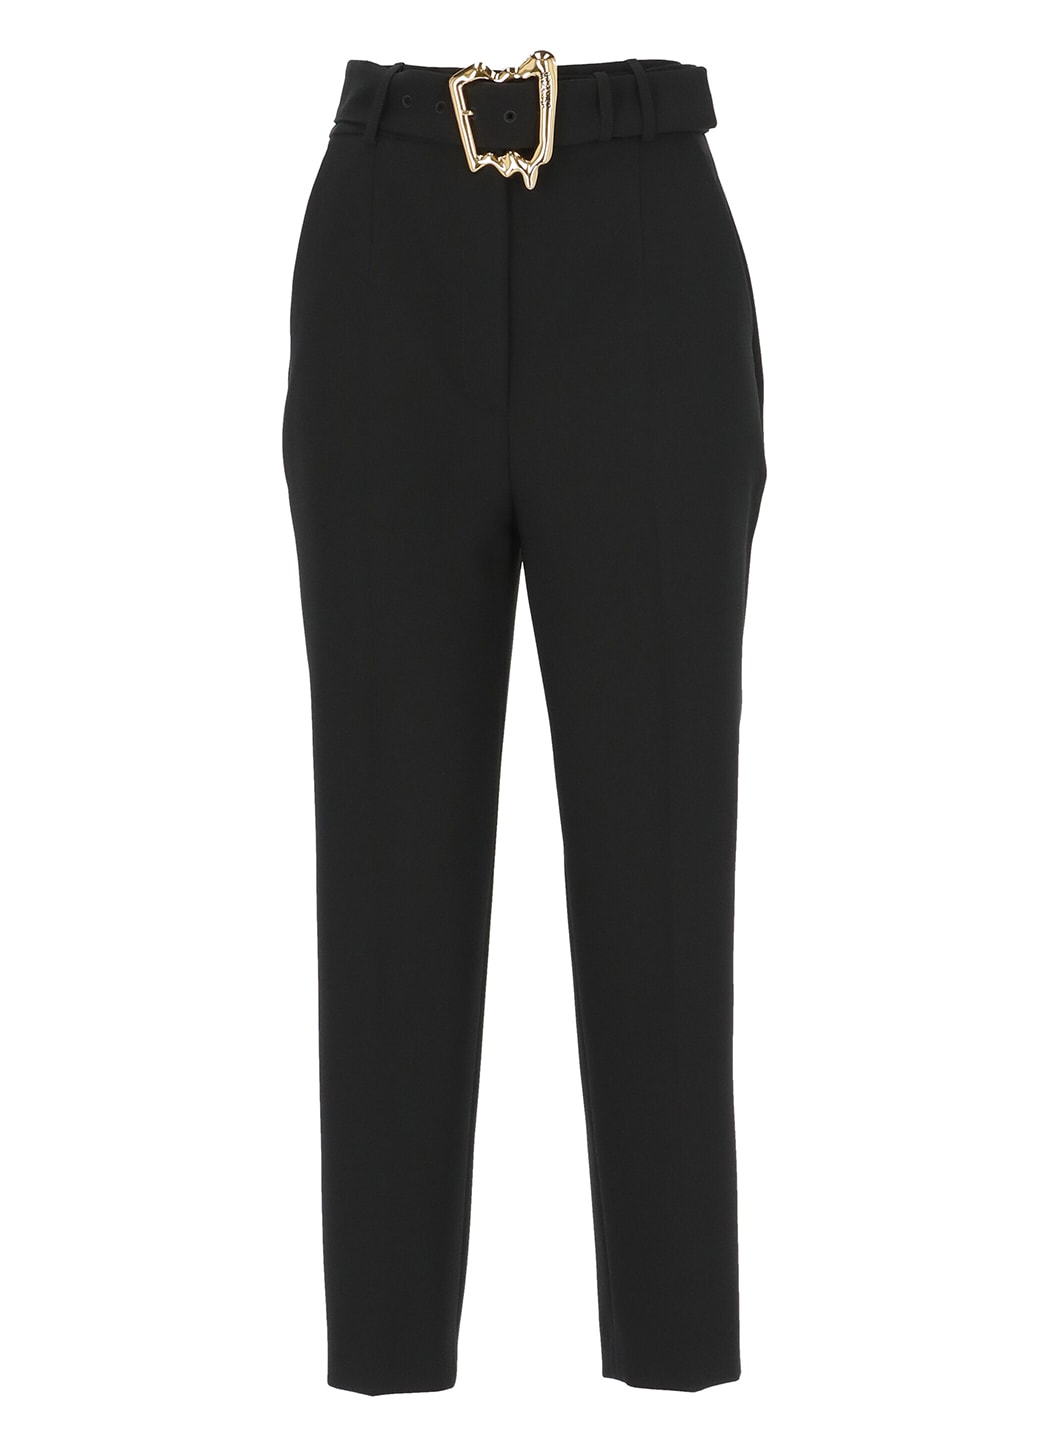 MOSCHINO MORPHED BUCKLE TROUSERS